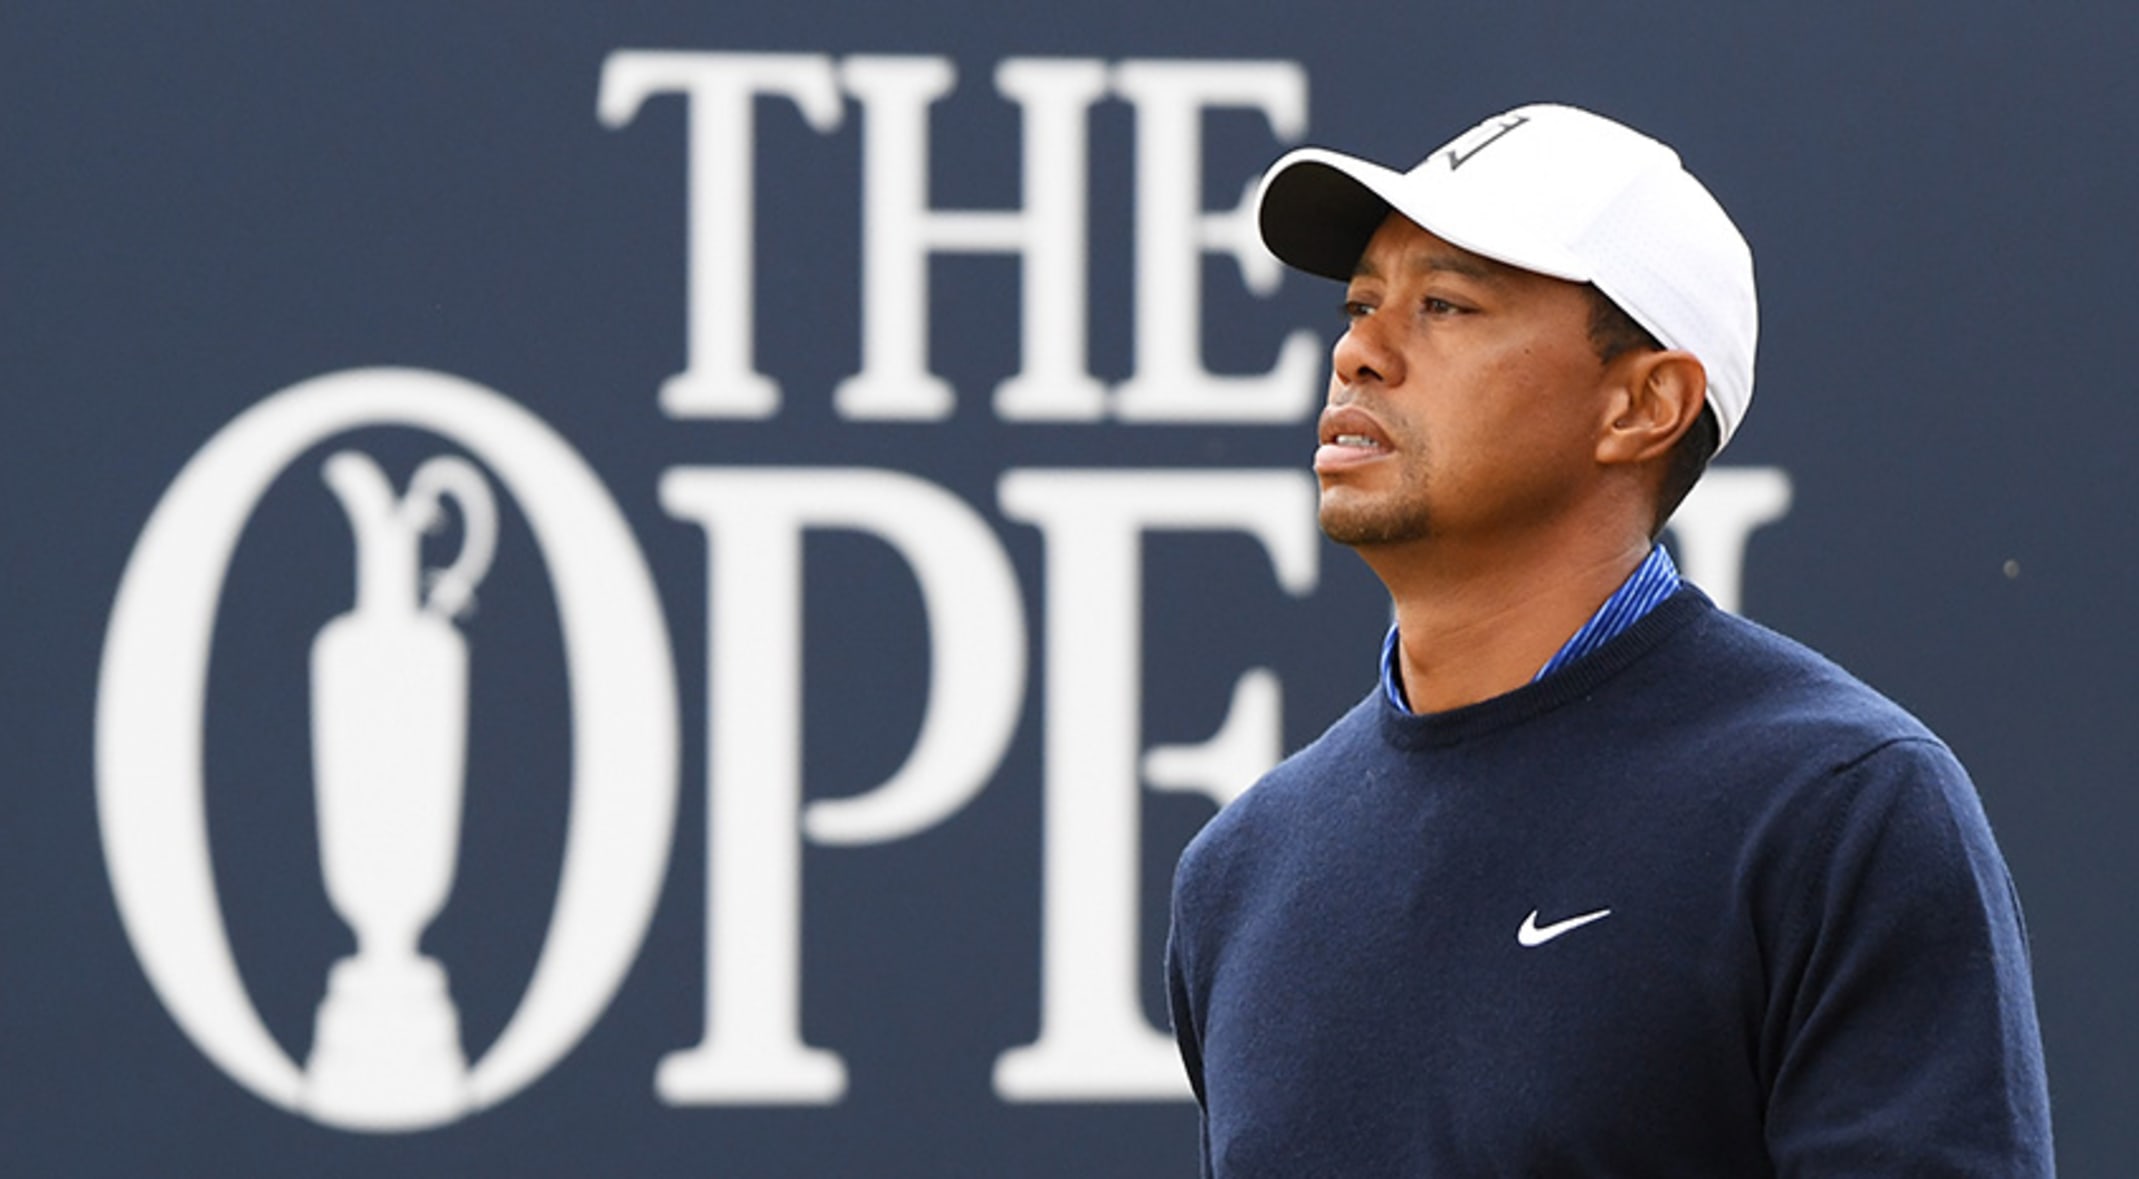 Tiger Woods Hoping To Get Creative At Carnoustie